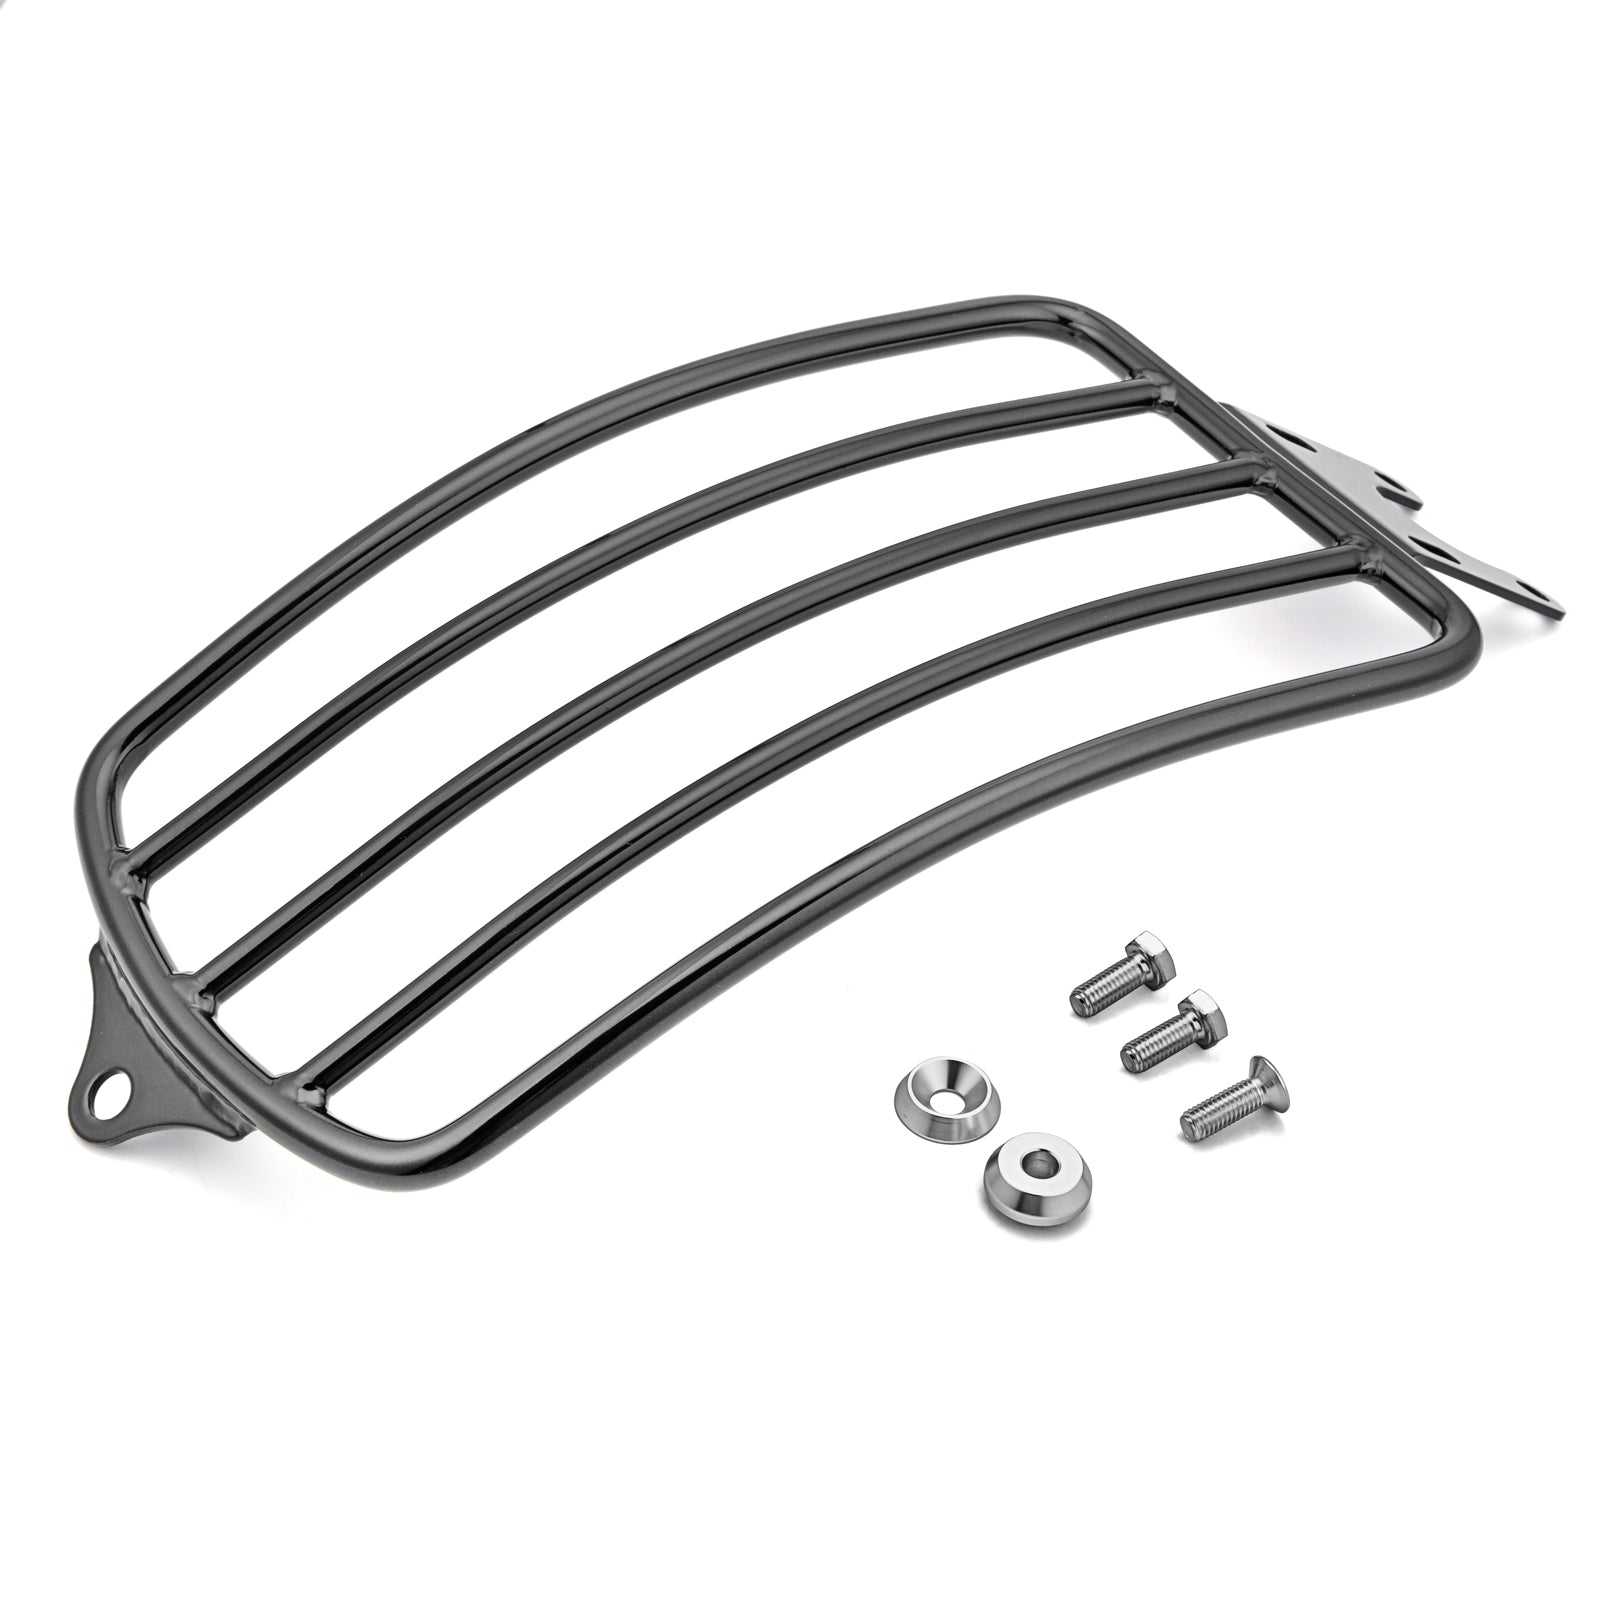 2015-UP Indian Scout Sixty Heavy Duty Bolt-On Rear Fender Solo Luggage Rack